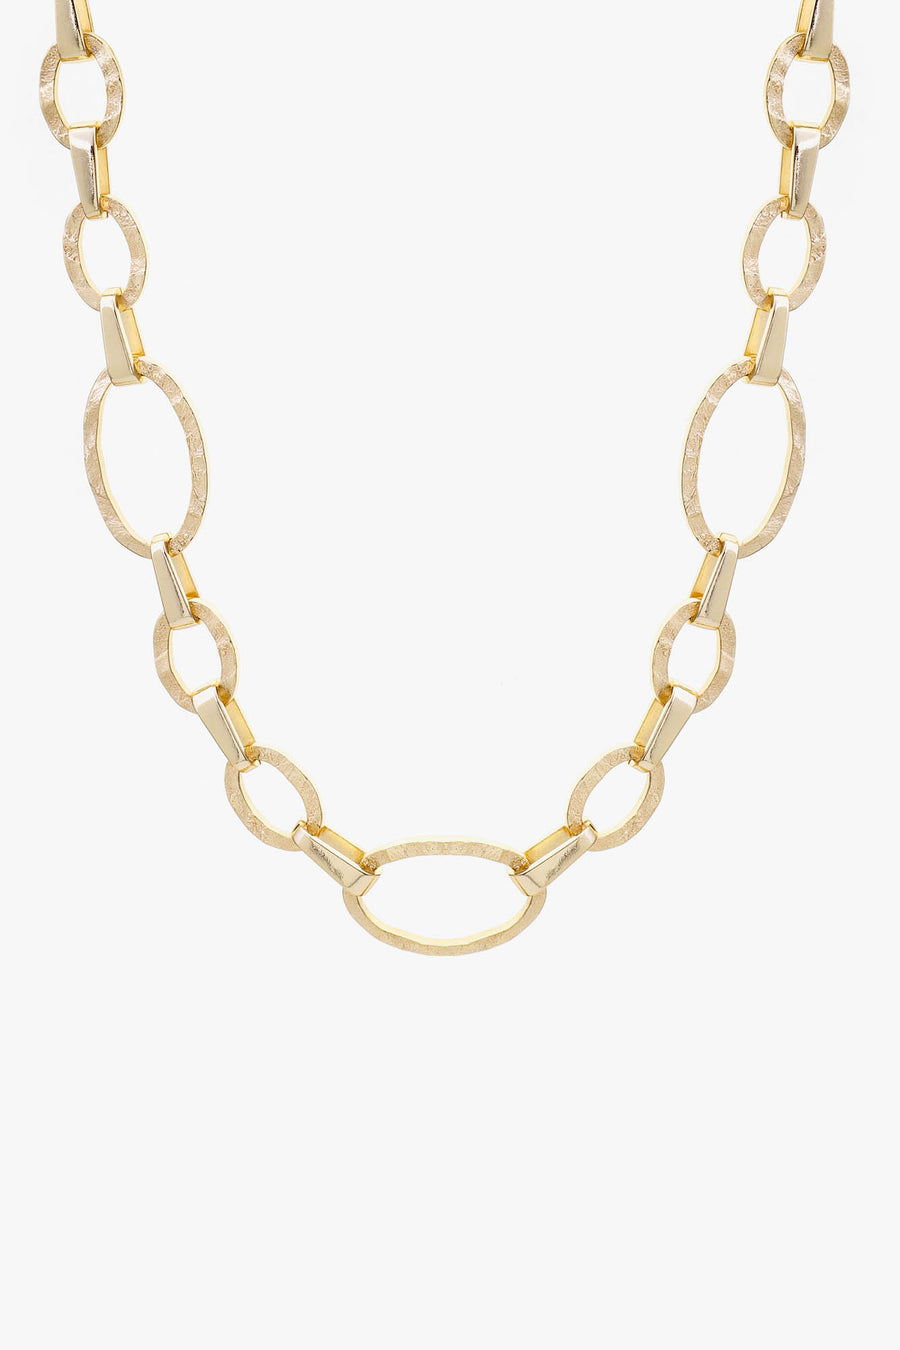 MONSOON NECKLACE GOLD